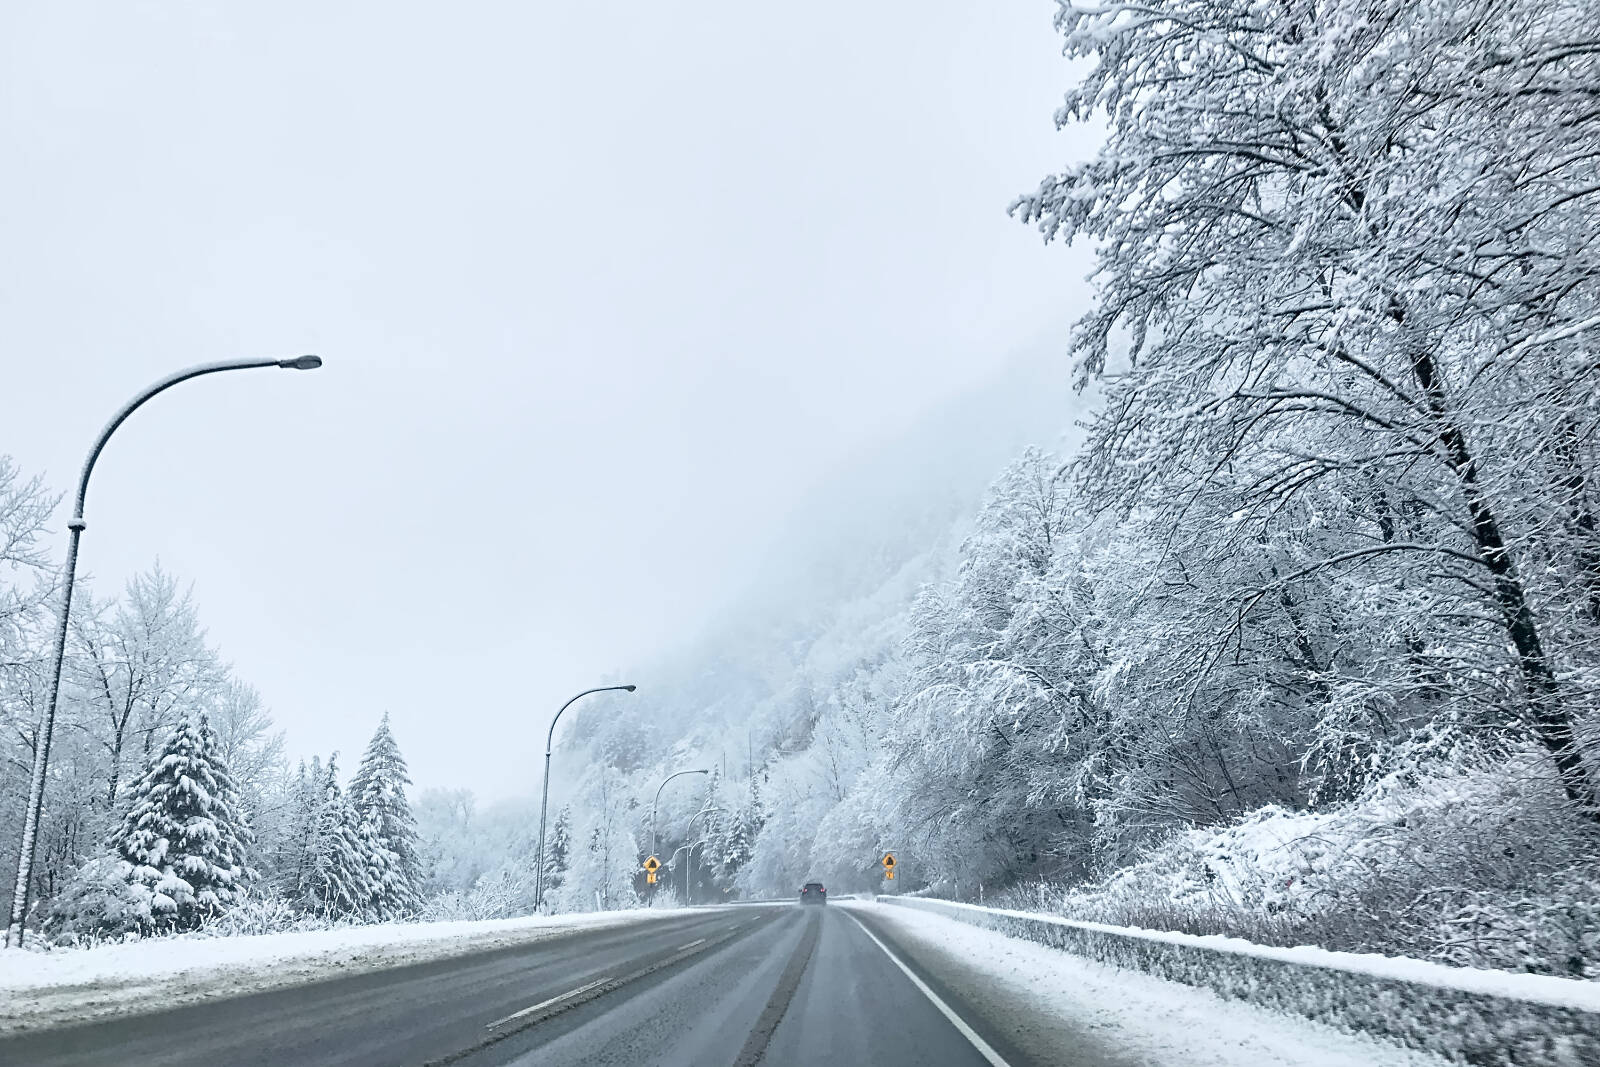 In addition to outfitting your vehicle with the right tires – preferably snow tires – it’s essential to slow down, accelerate and brake more slowly, and turn your lights on, day and night, notes Blair Qualey, President and CEO of the New Car Dealers Association of BC.